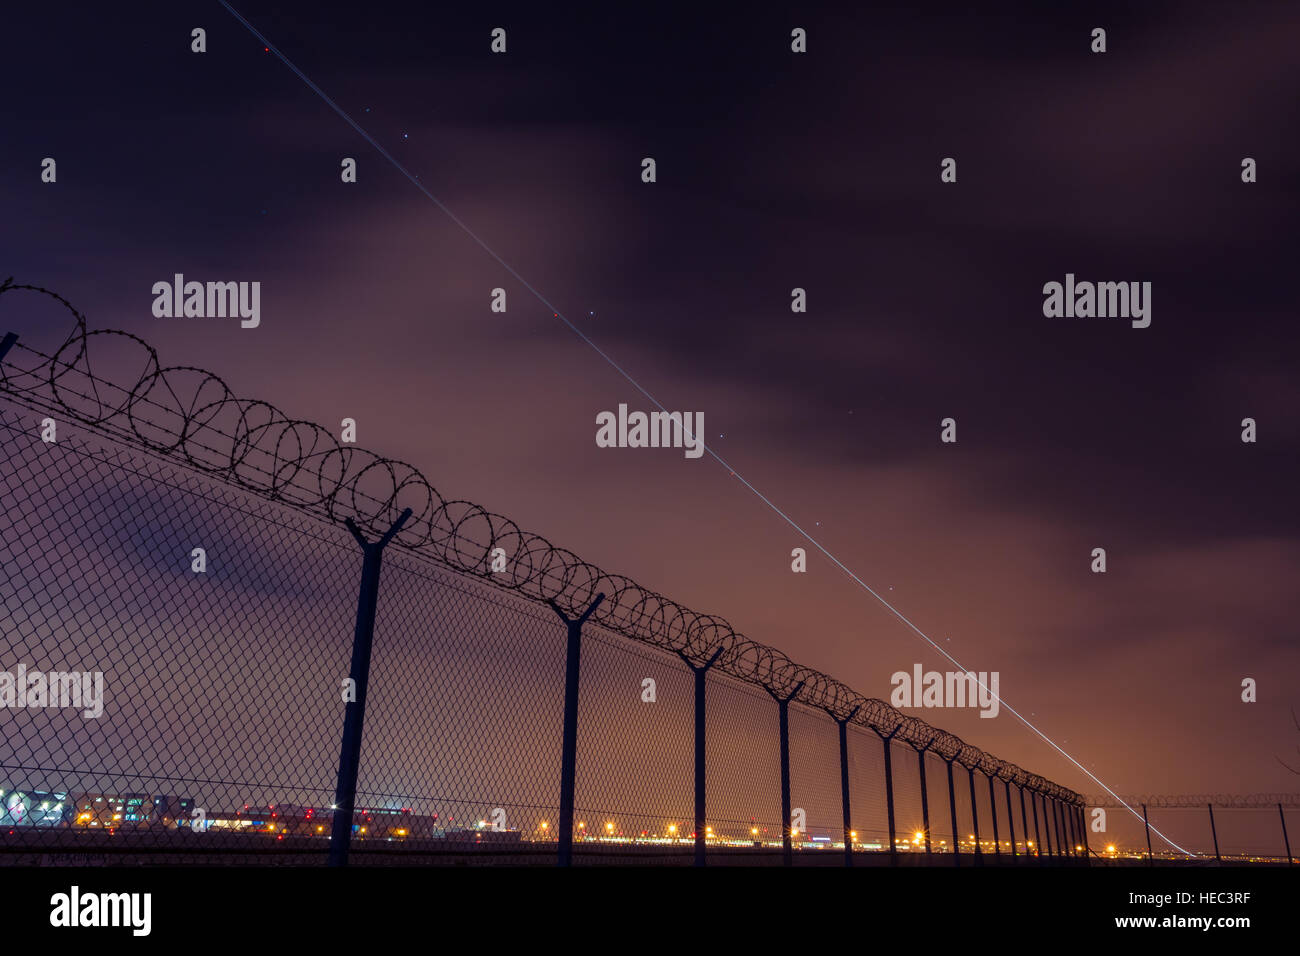 Take off of commercial airliner from international Chopin airport in Warsaw in long exposure. Stock Photo